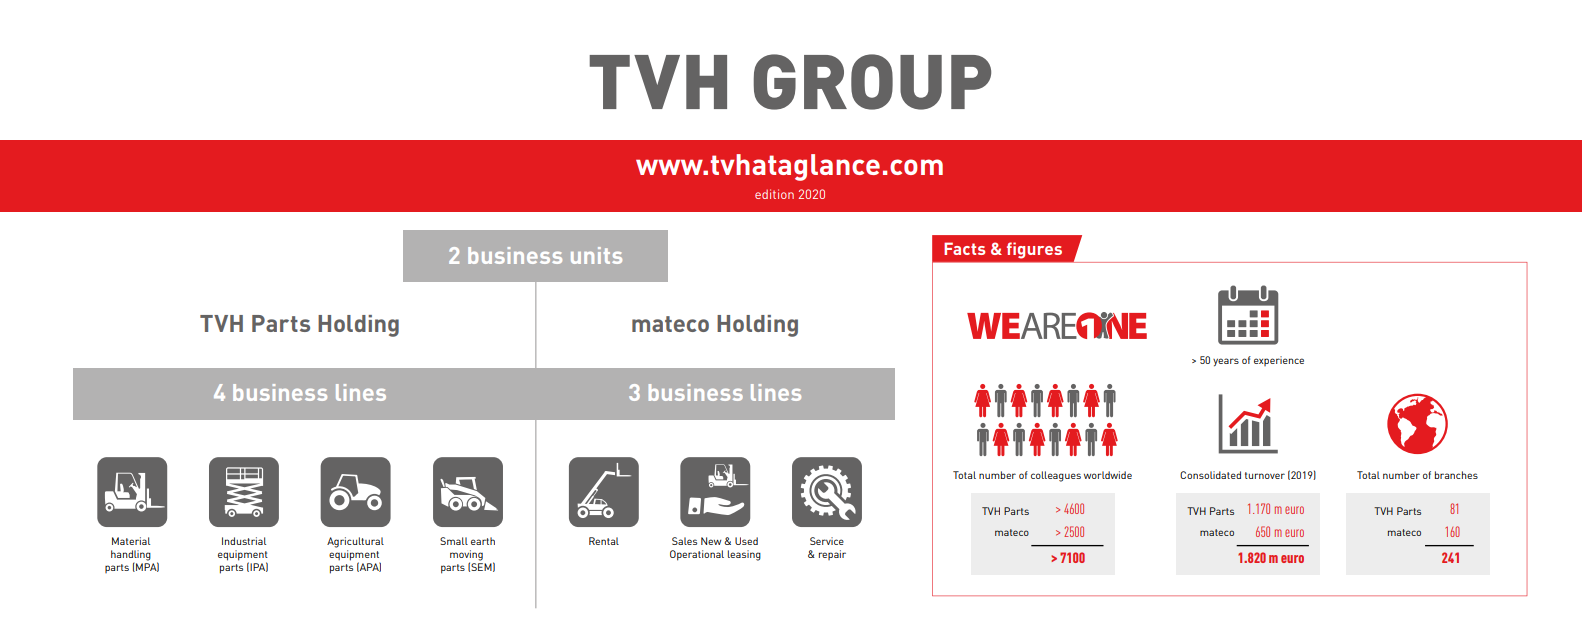 TVH Group facts and figures